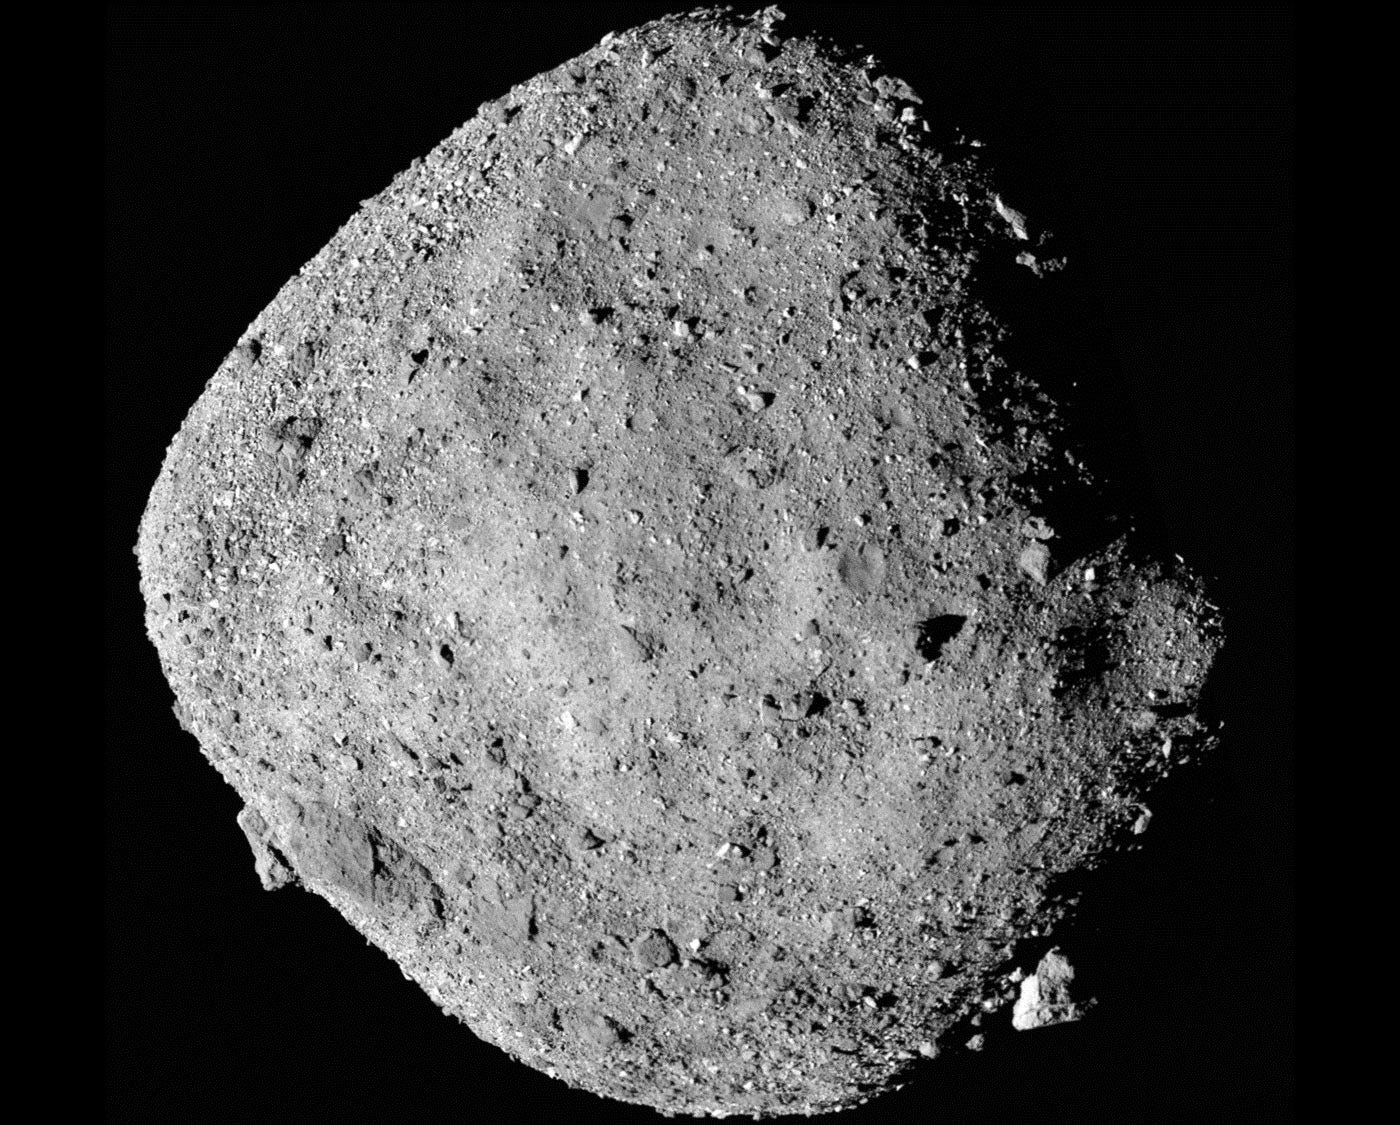 Bennus is a diamond-shaped gray asteroid, covered in rubble.